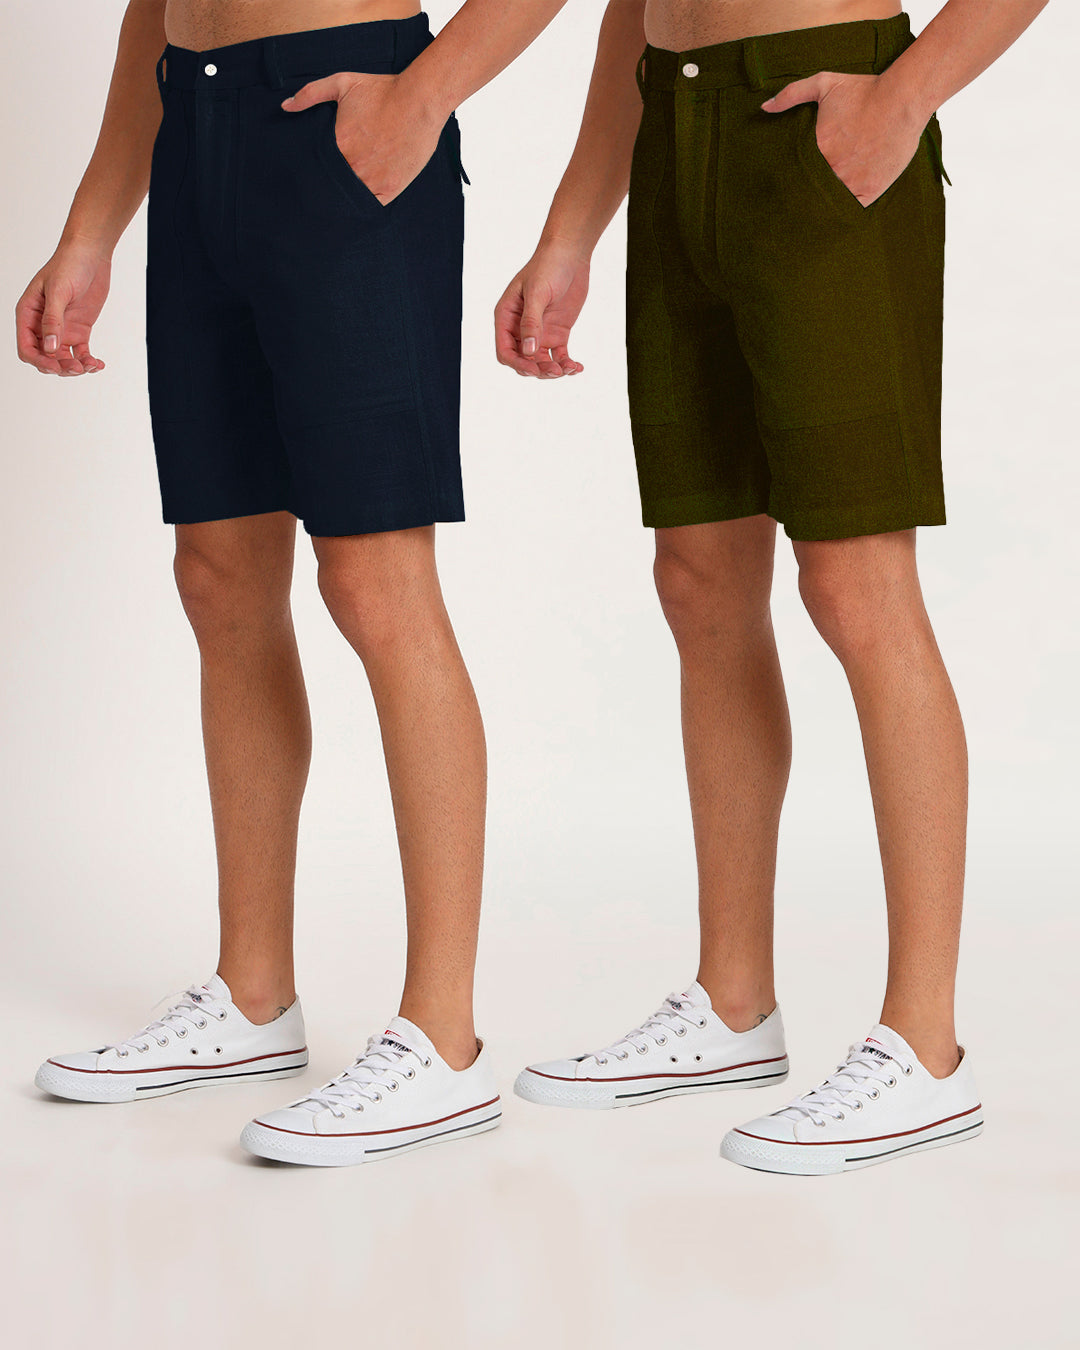 Combo : Patch Pocket Playtime Midnight Blue & Olive Green Men's Shorts